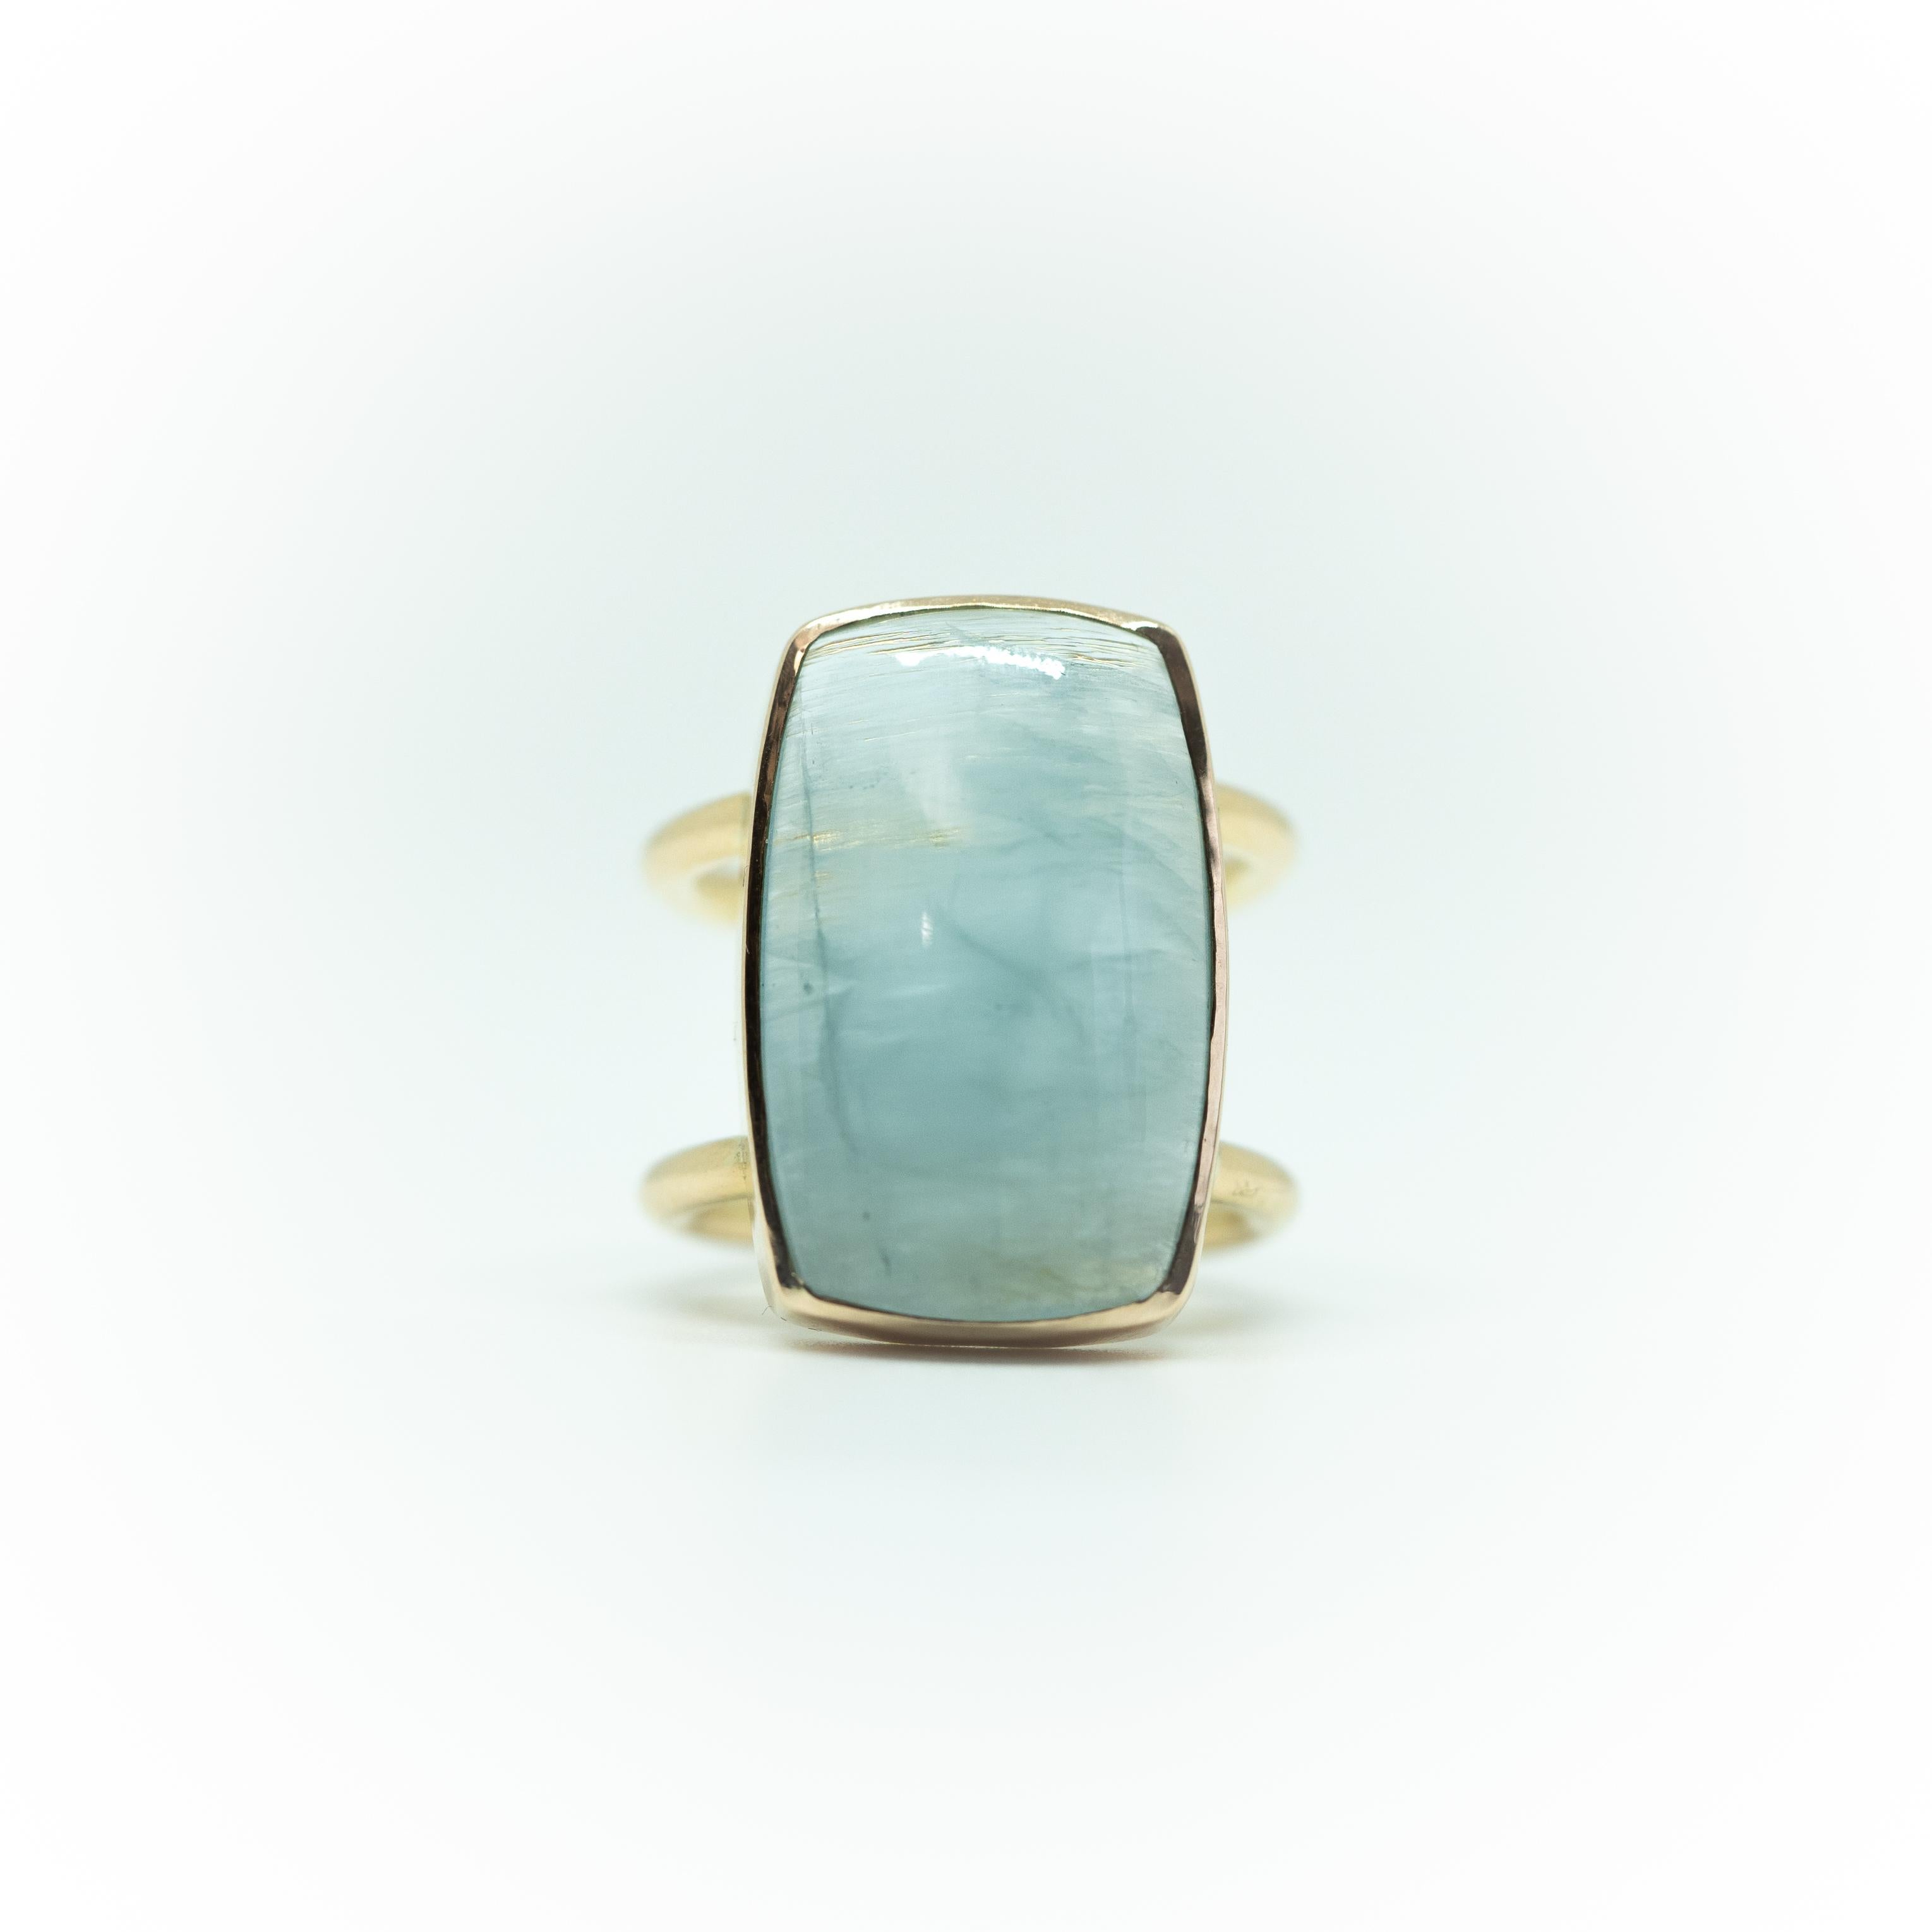 Contemporary 18 Karat Gold Ring with an 18.87 Carat Aquamarine Cabochon by Marion Jeantet For Sale